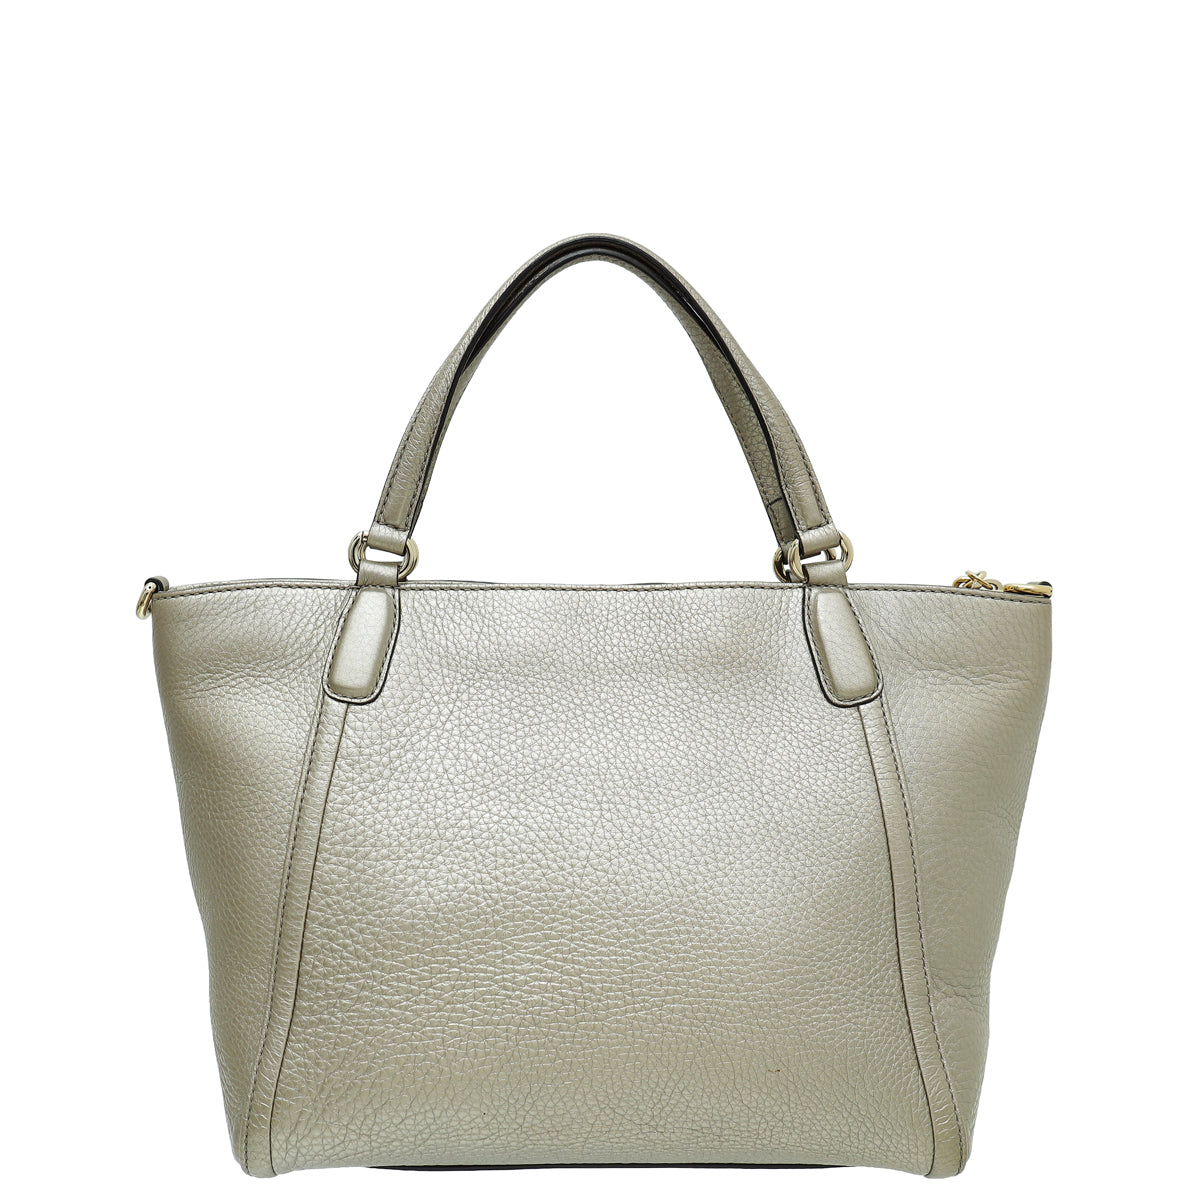 Load image into Gallery viewer, Gucci Metallic Champagne Soho Convertible Tote Small Bag
